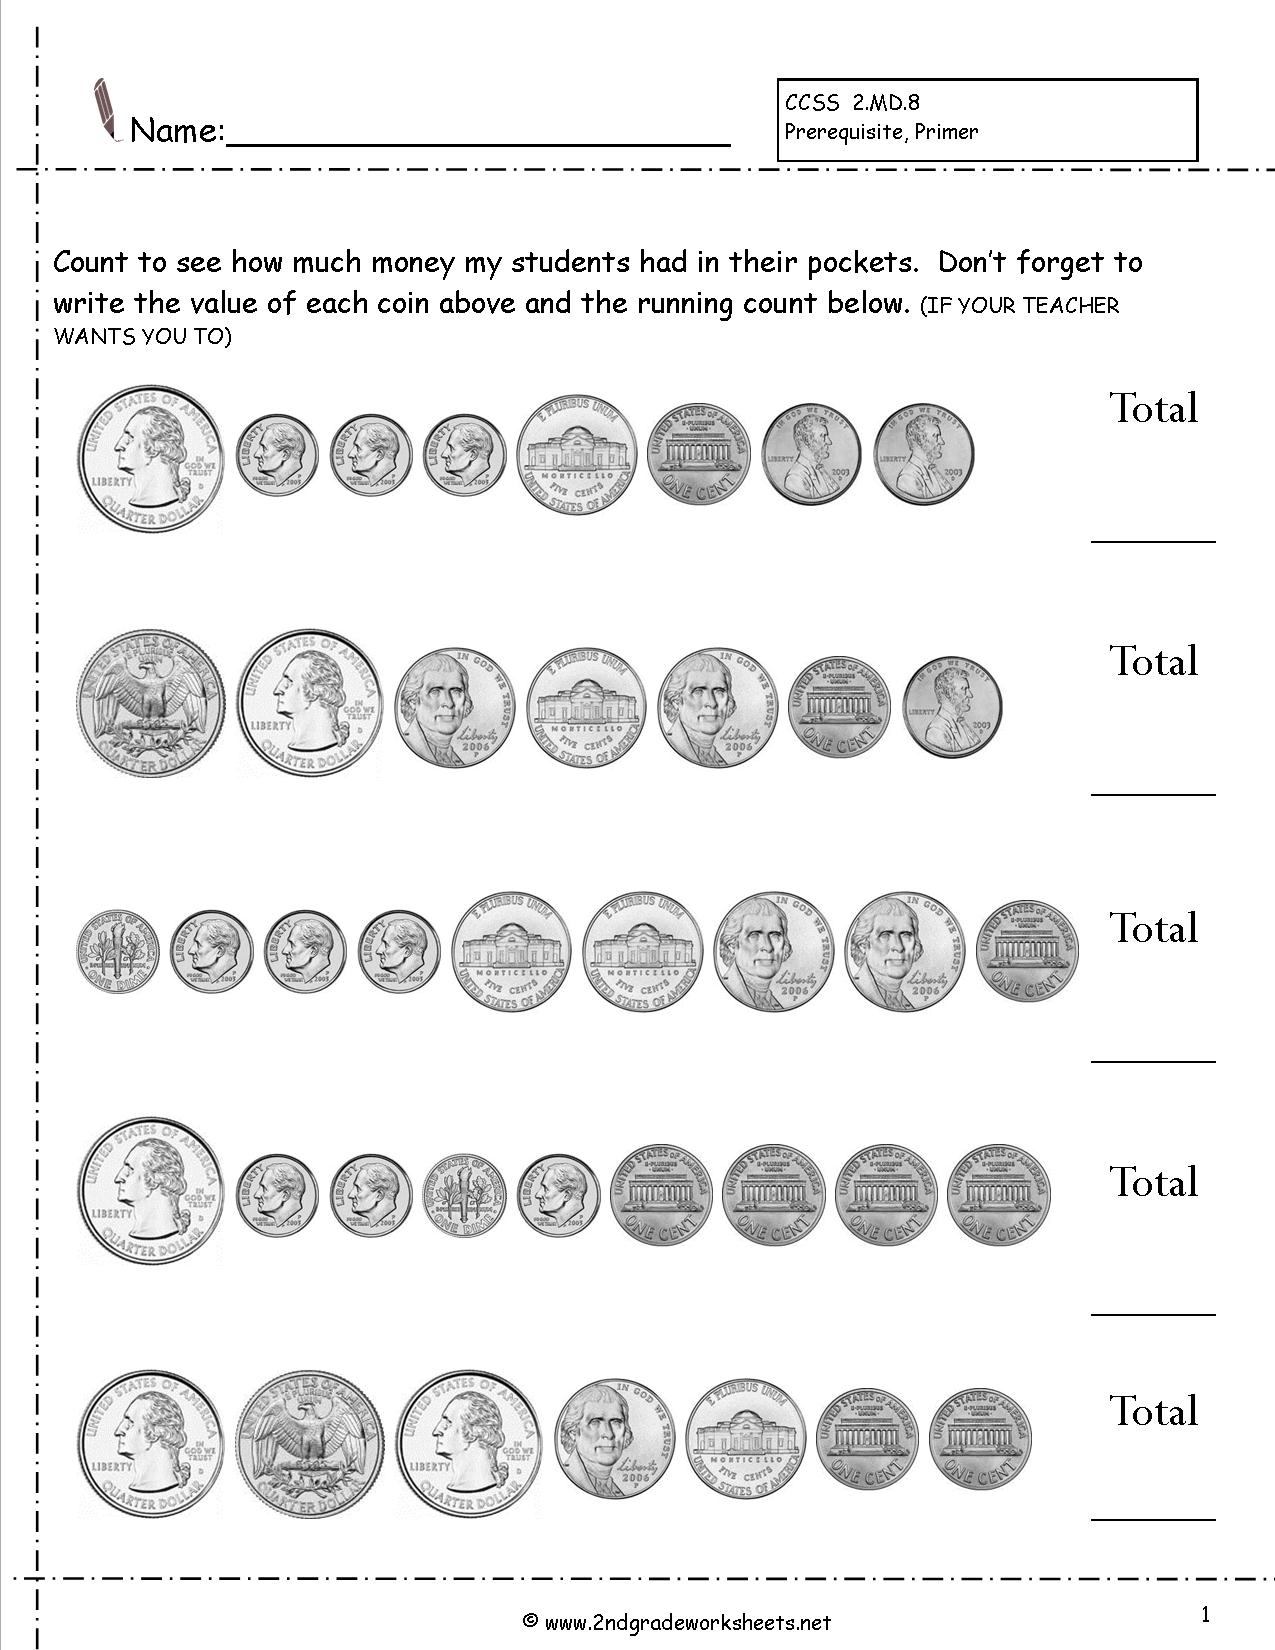 Counting Money Worksheets 2nd Grade Image